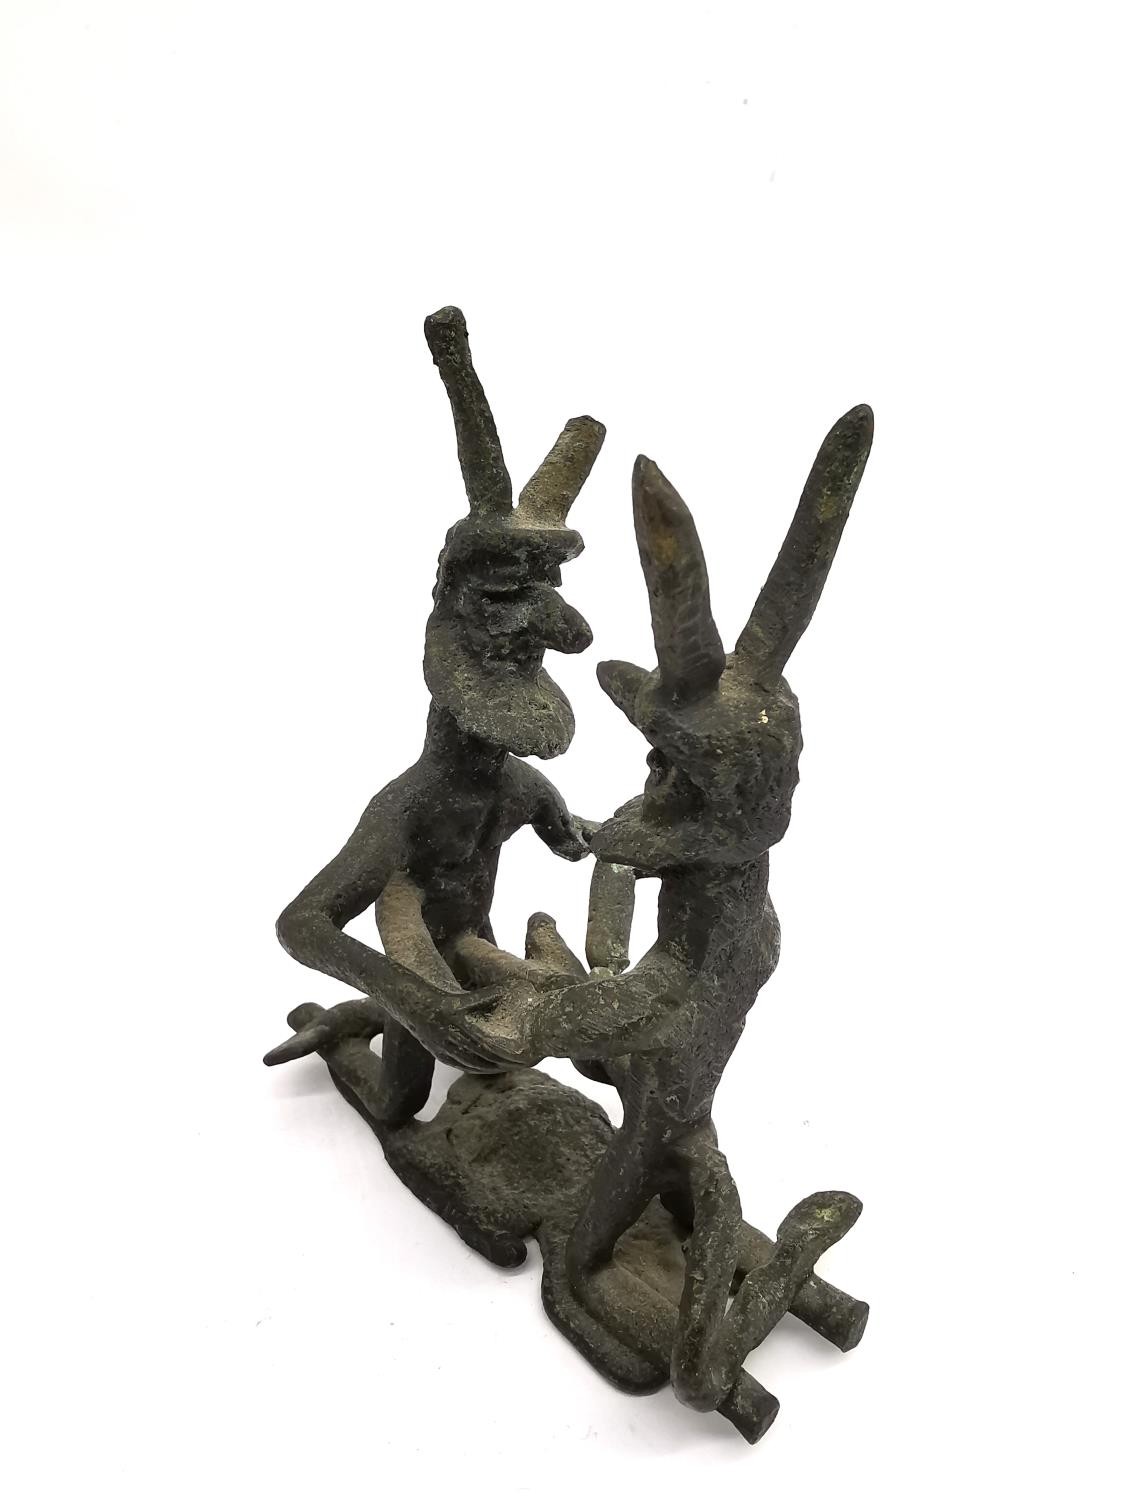 A Tribal bronze erotic sculpture of two bearded mythical creatures fighting. H.12 L.10.5 W.7cm. - Image 4 of 7